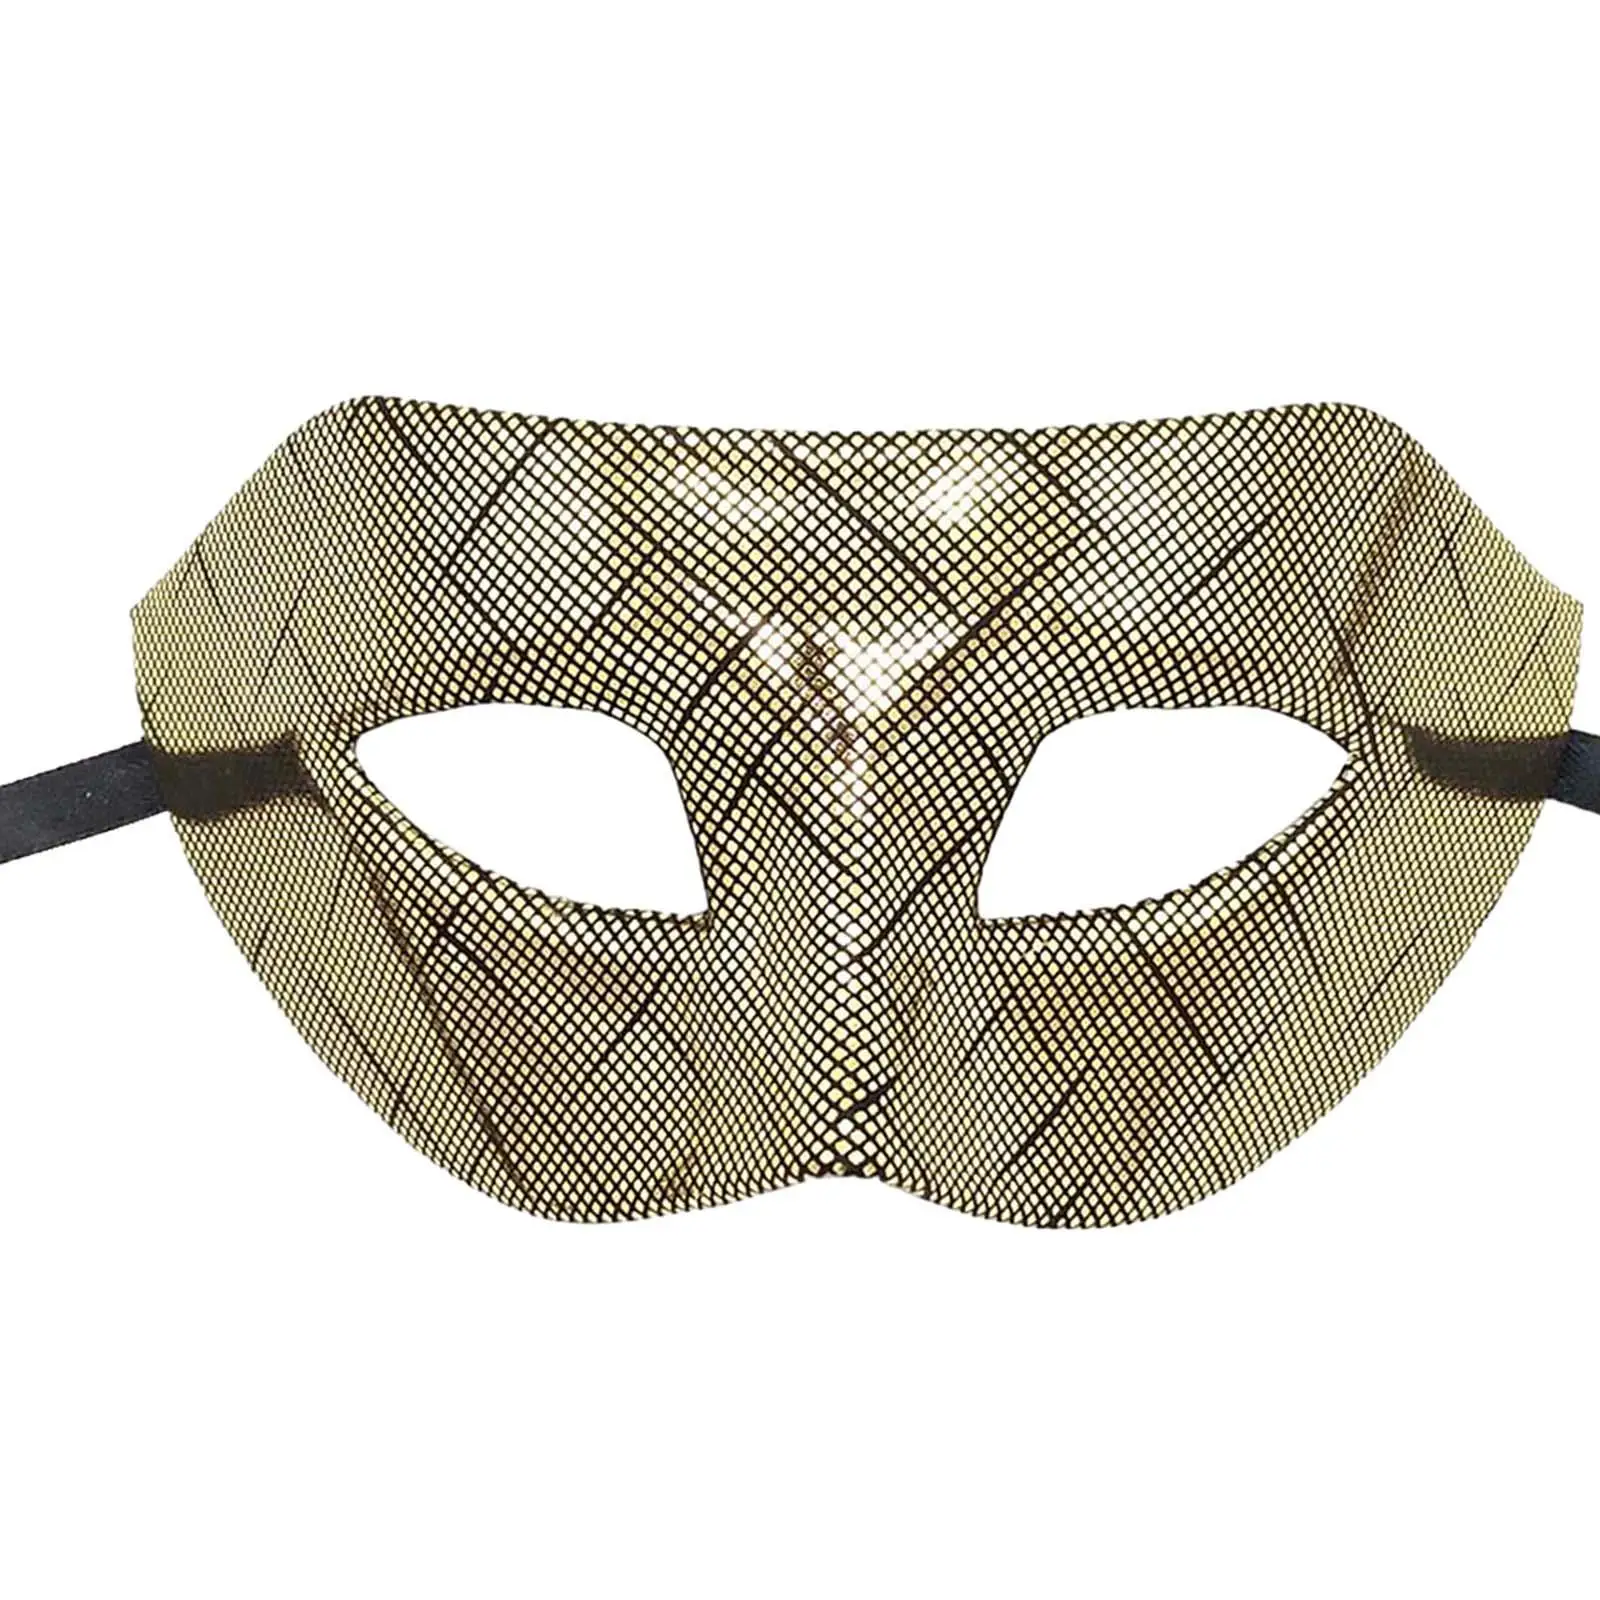 Masquerade Mask Costume Accessories for Stage Performance Halloween Dress up